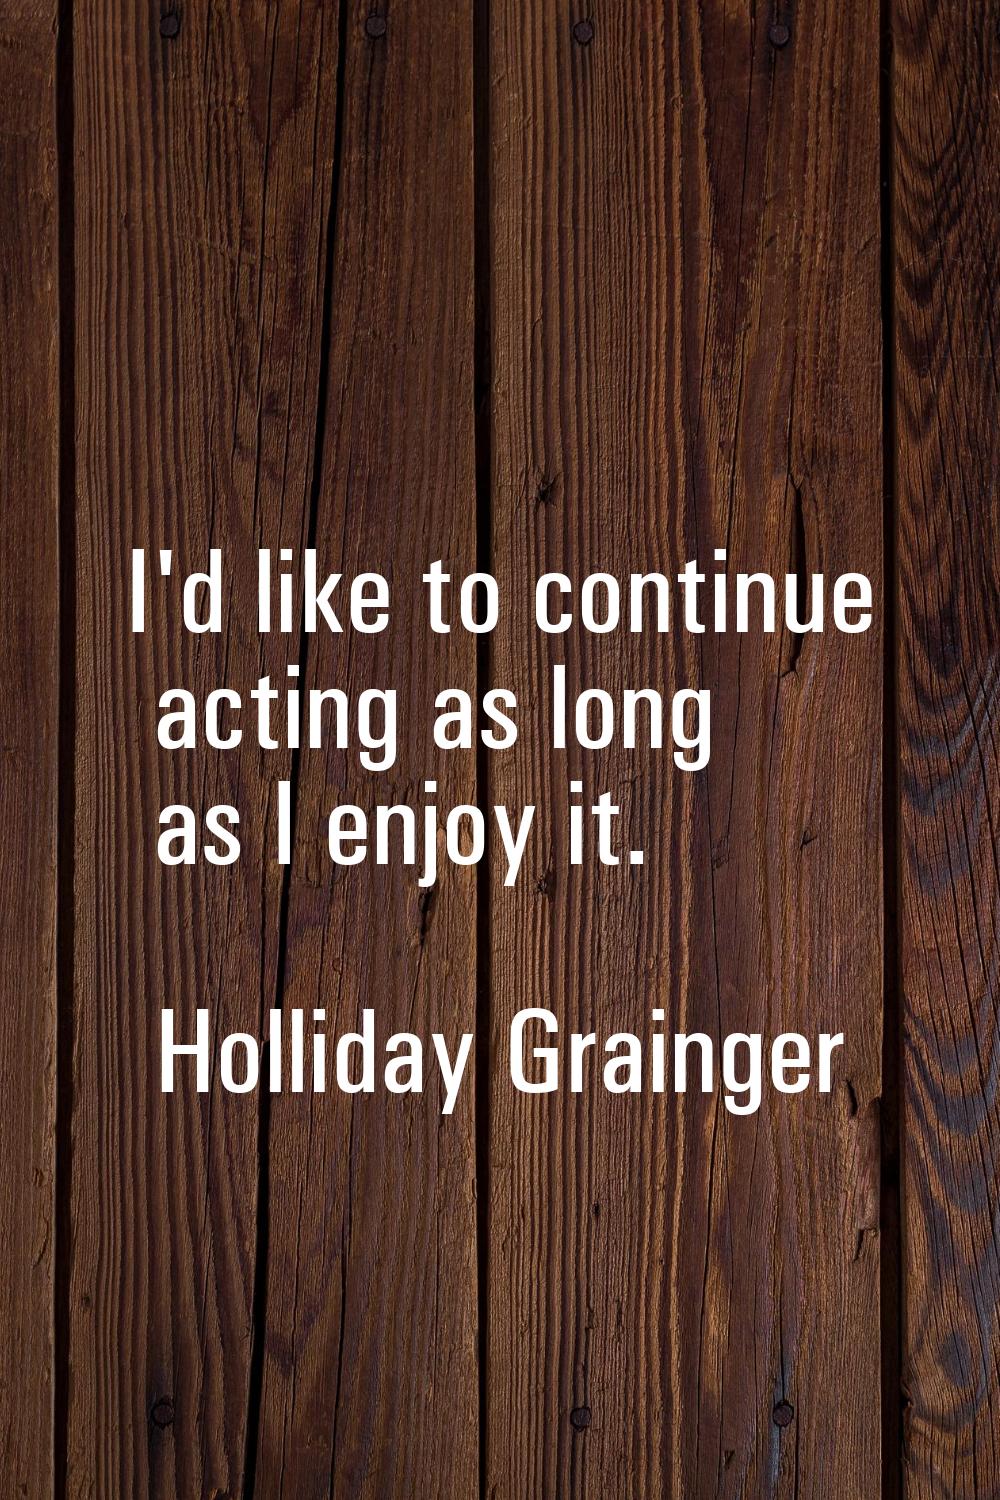 I'd like to continue acting as long as I enjoy it.